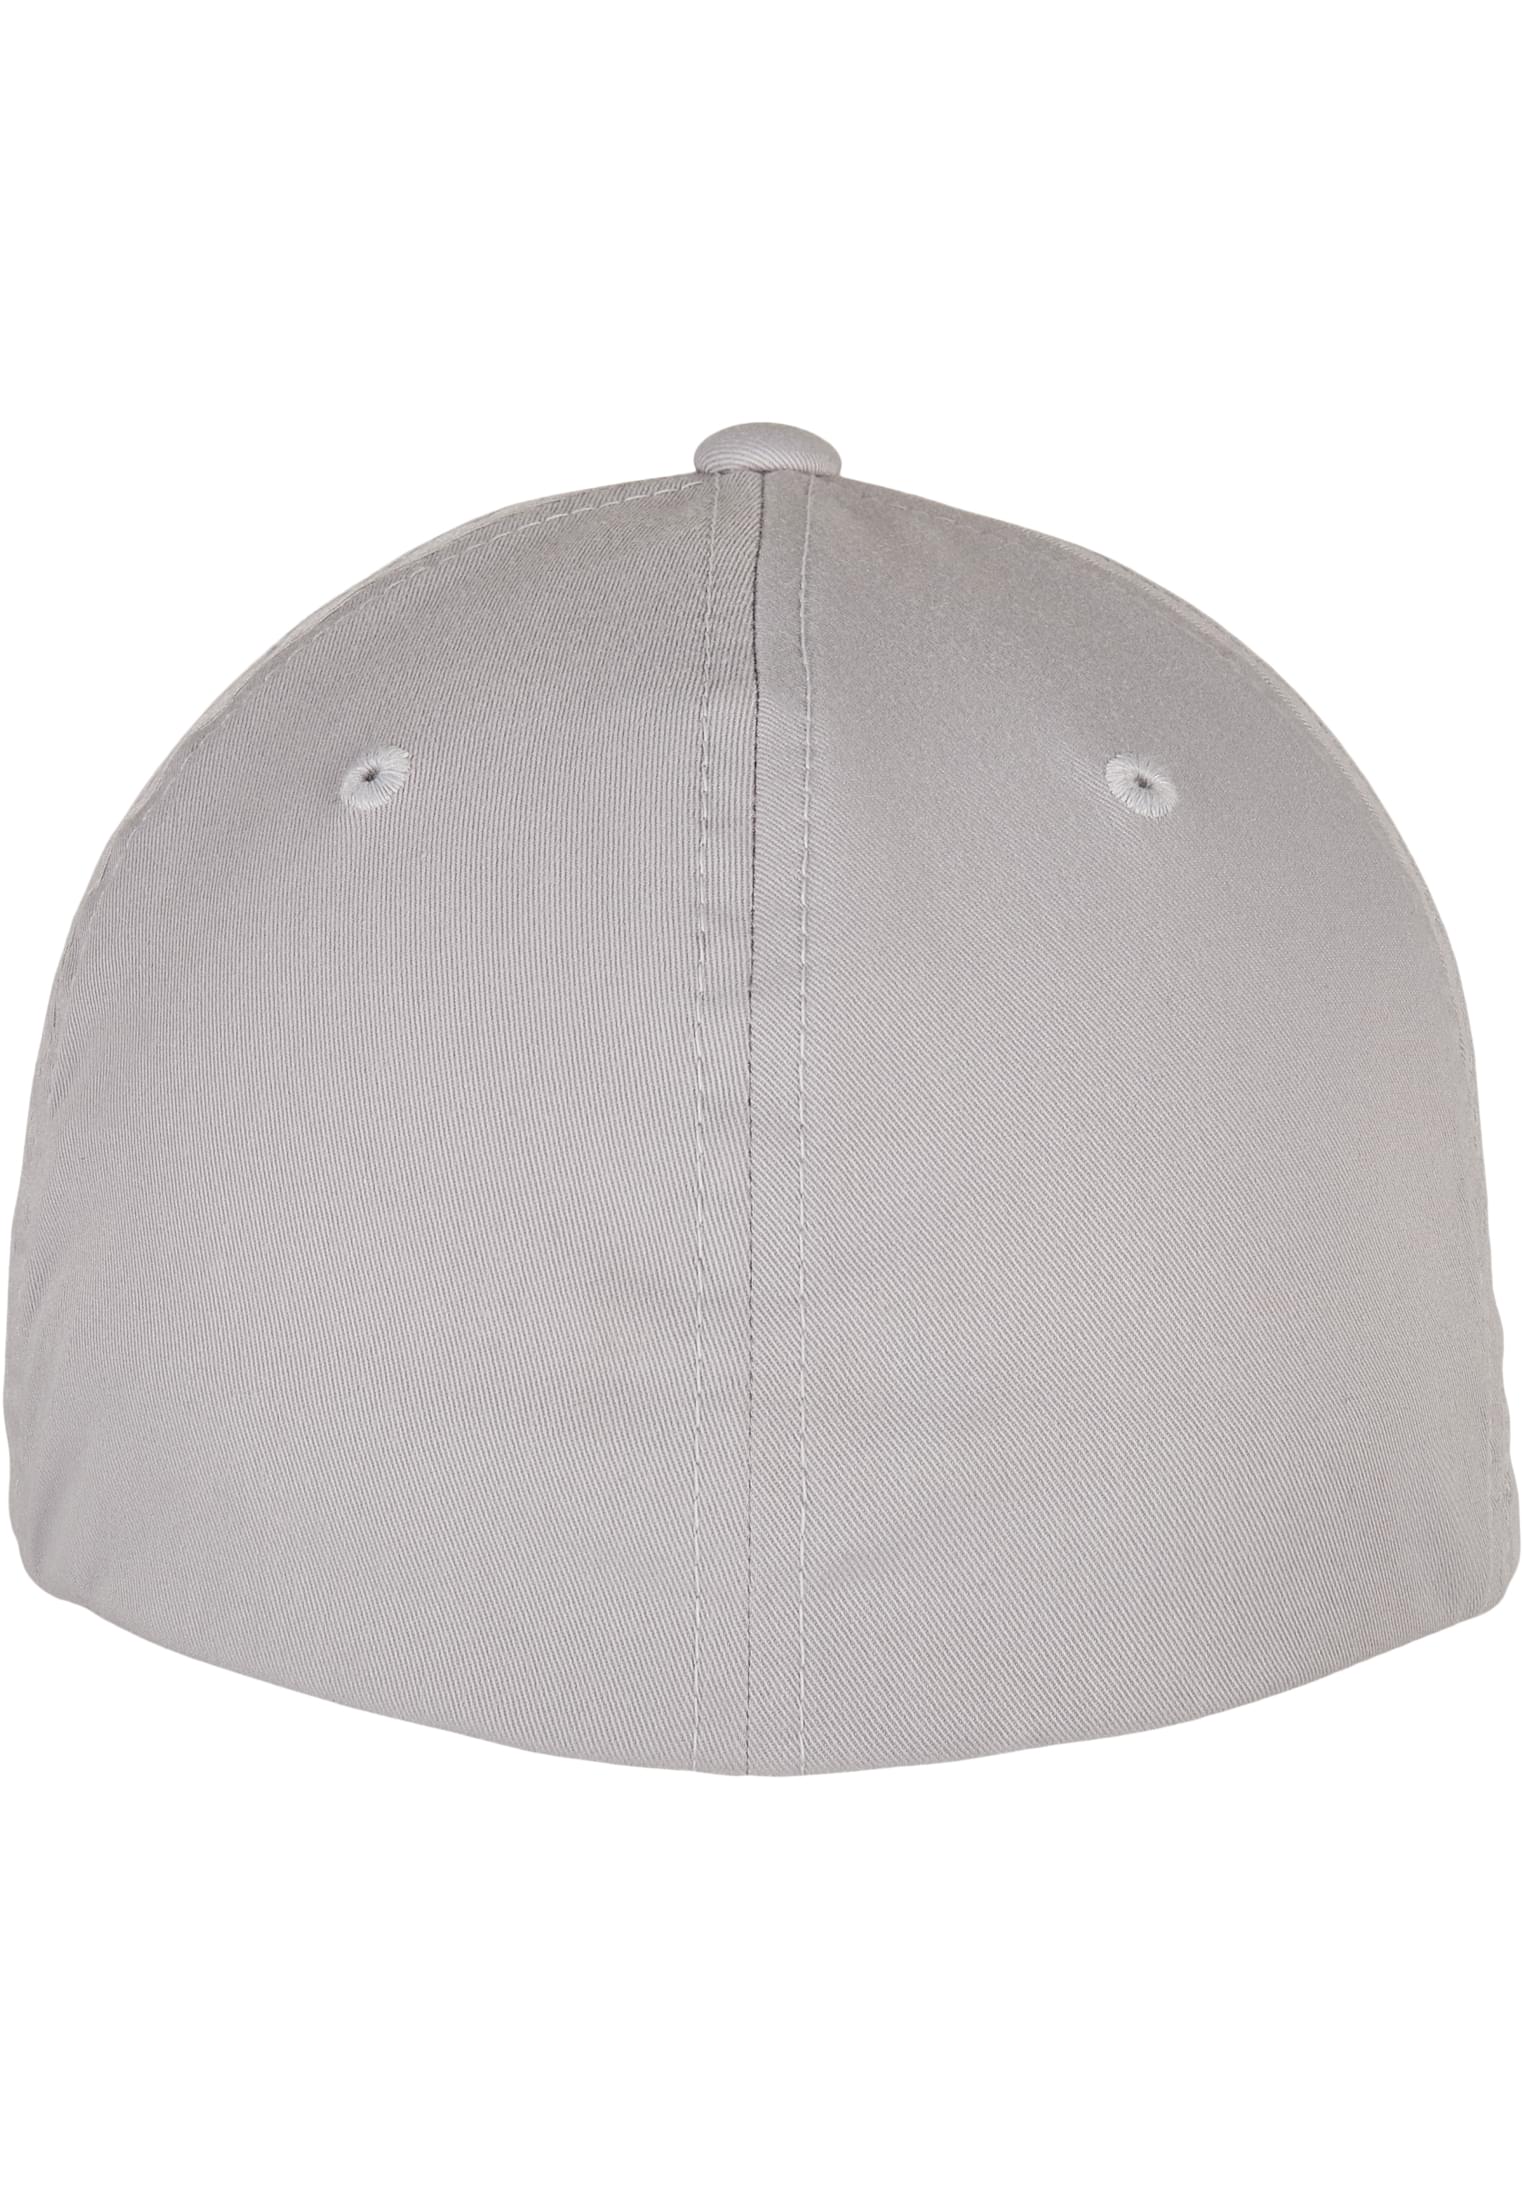 Flexfit Polyester Recycled Cap-6277RP